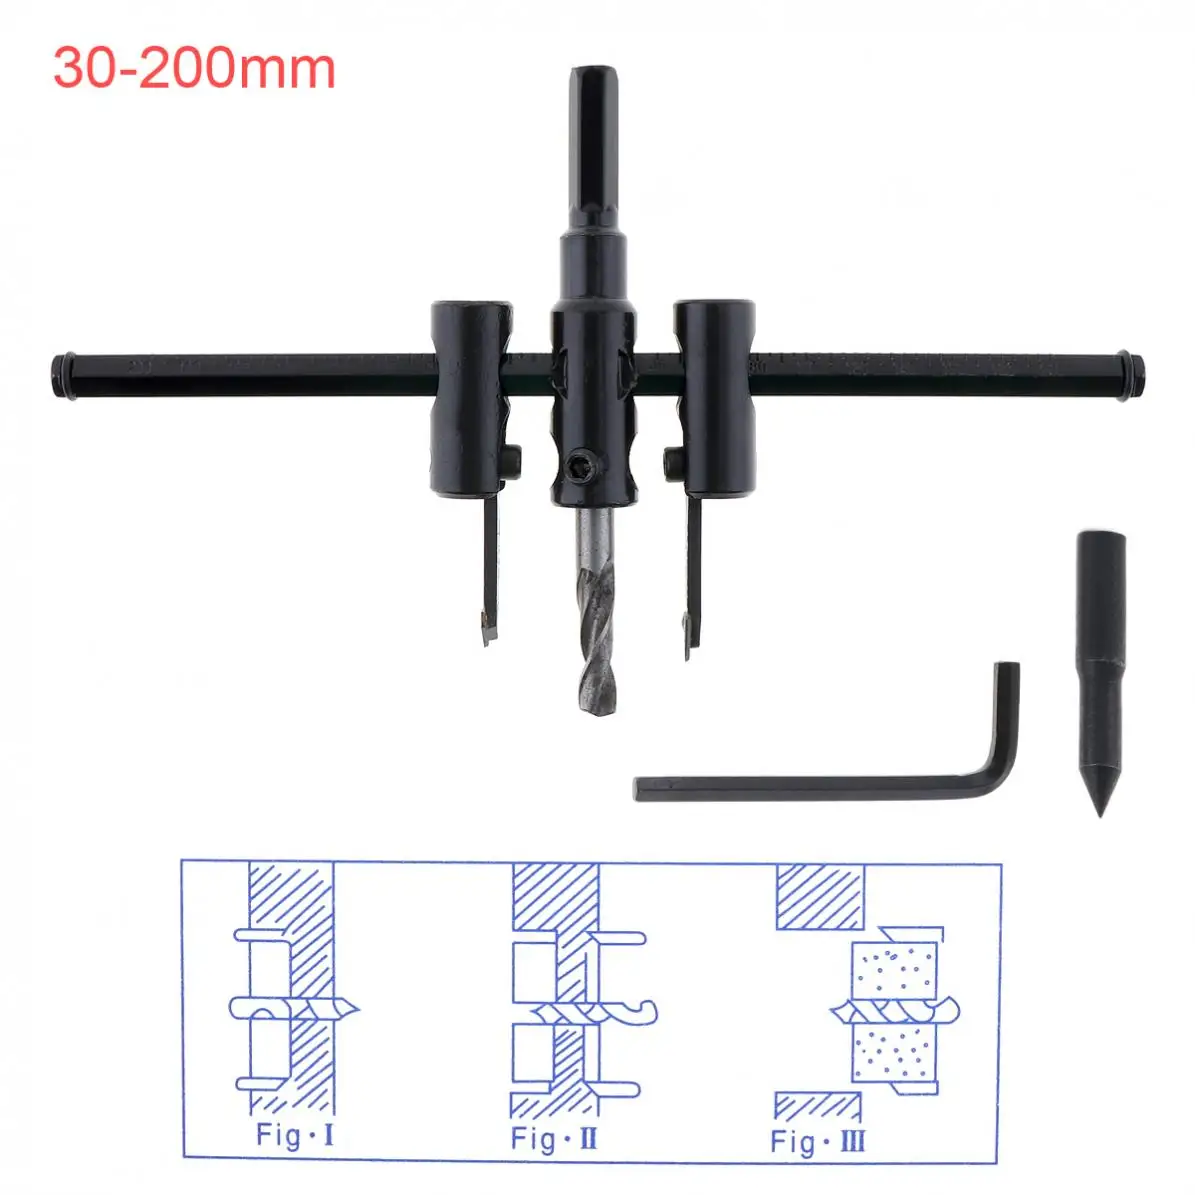 TORO 30-120/200mm Adjustable Circle Hole Saw Aircraft Type Round Hole Drill Bit Wood Opener Cutter DIY Woodworking Cutting Tool